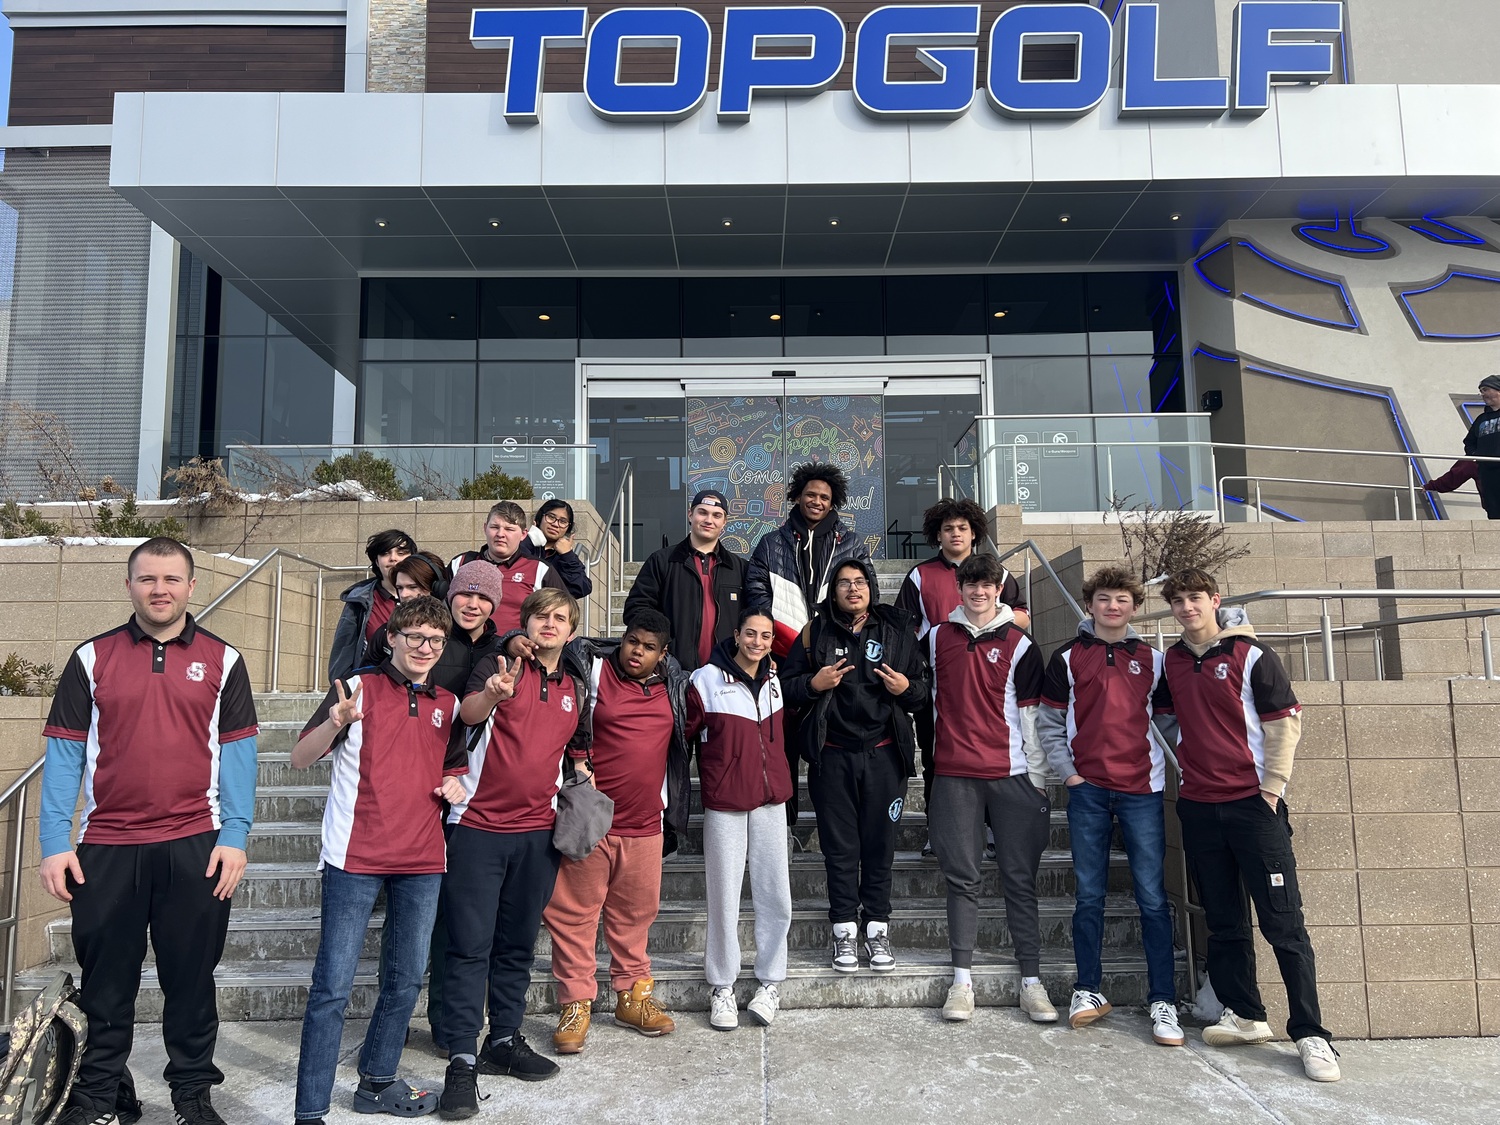 For the first time, the Southampton United Golf team had the opportunity to participate in a new golf program at Top Golf in Holbrook. As part of the program, sponsored by Special Olympics Long Island and Top Golf, the student-athletes practiced for eight weeks at the Top Golf facility to ready themselves for a final competition with teams from across Suffolk County. COURTESY SOUTHAMPTON SCHOOL DISTRICT